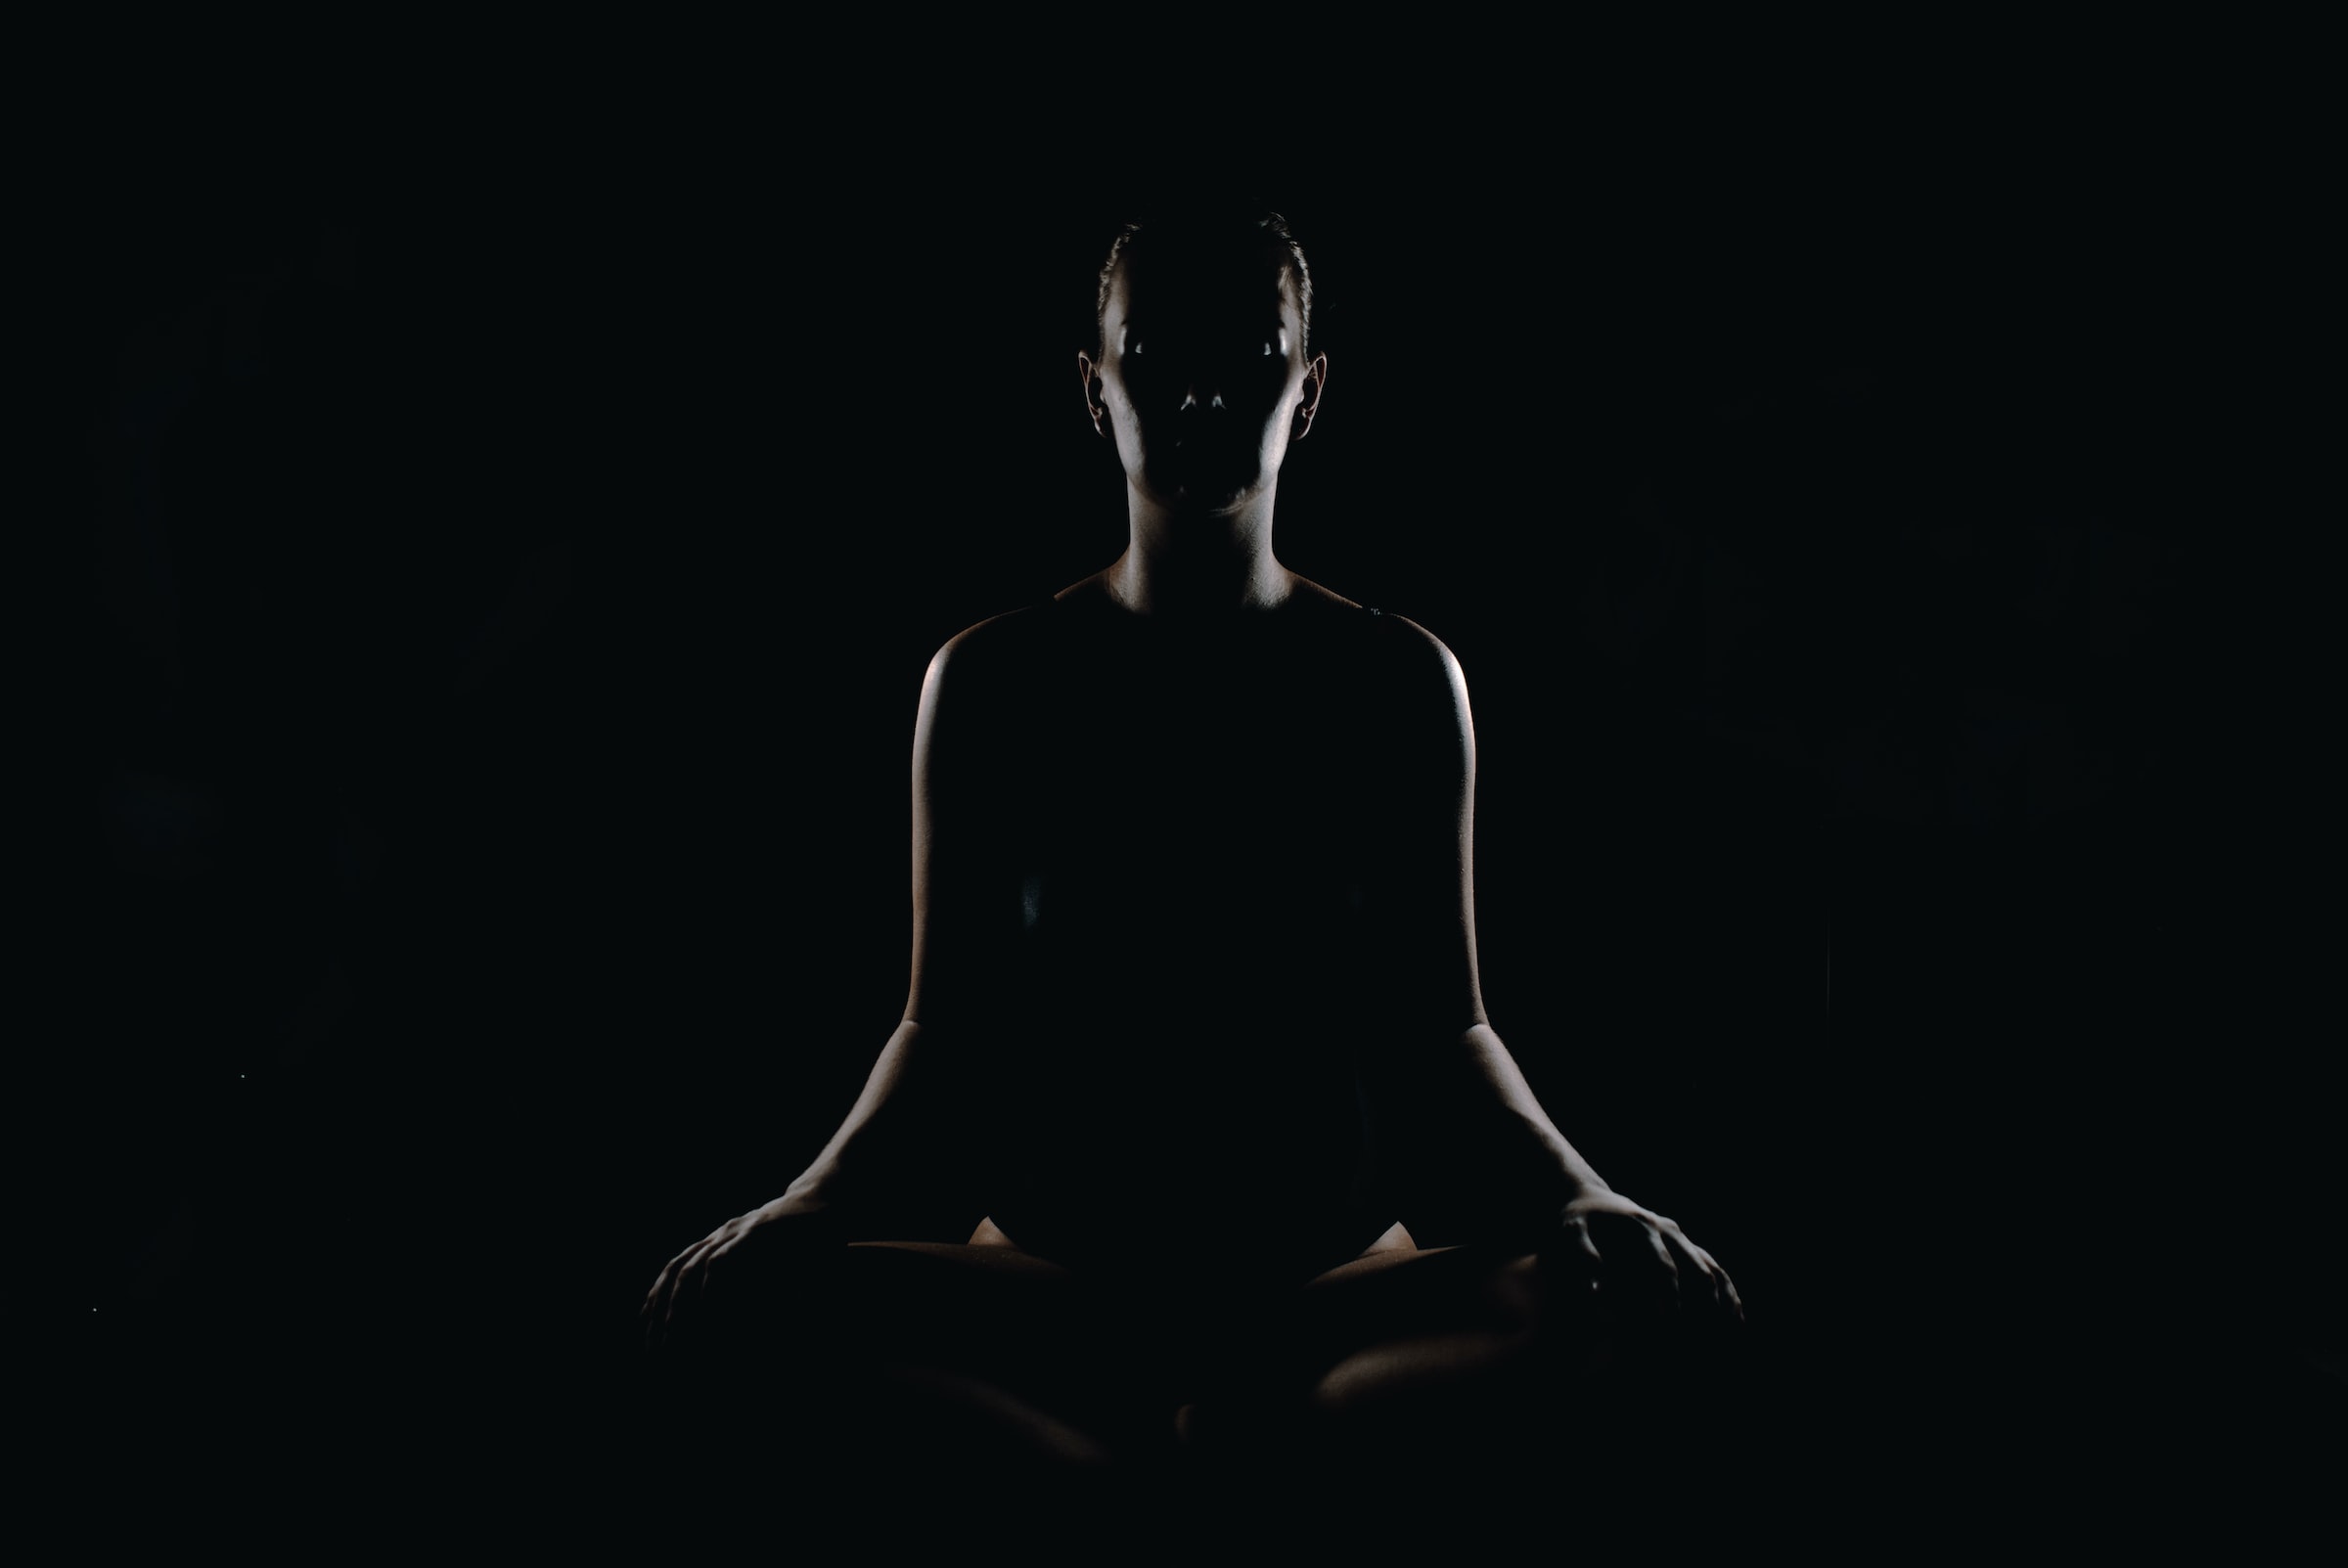 A person sits in a meditative pose